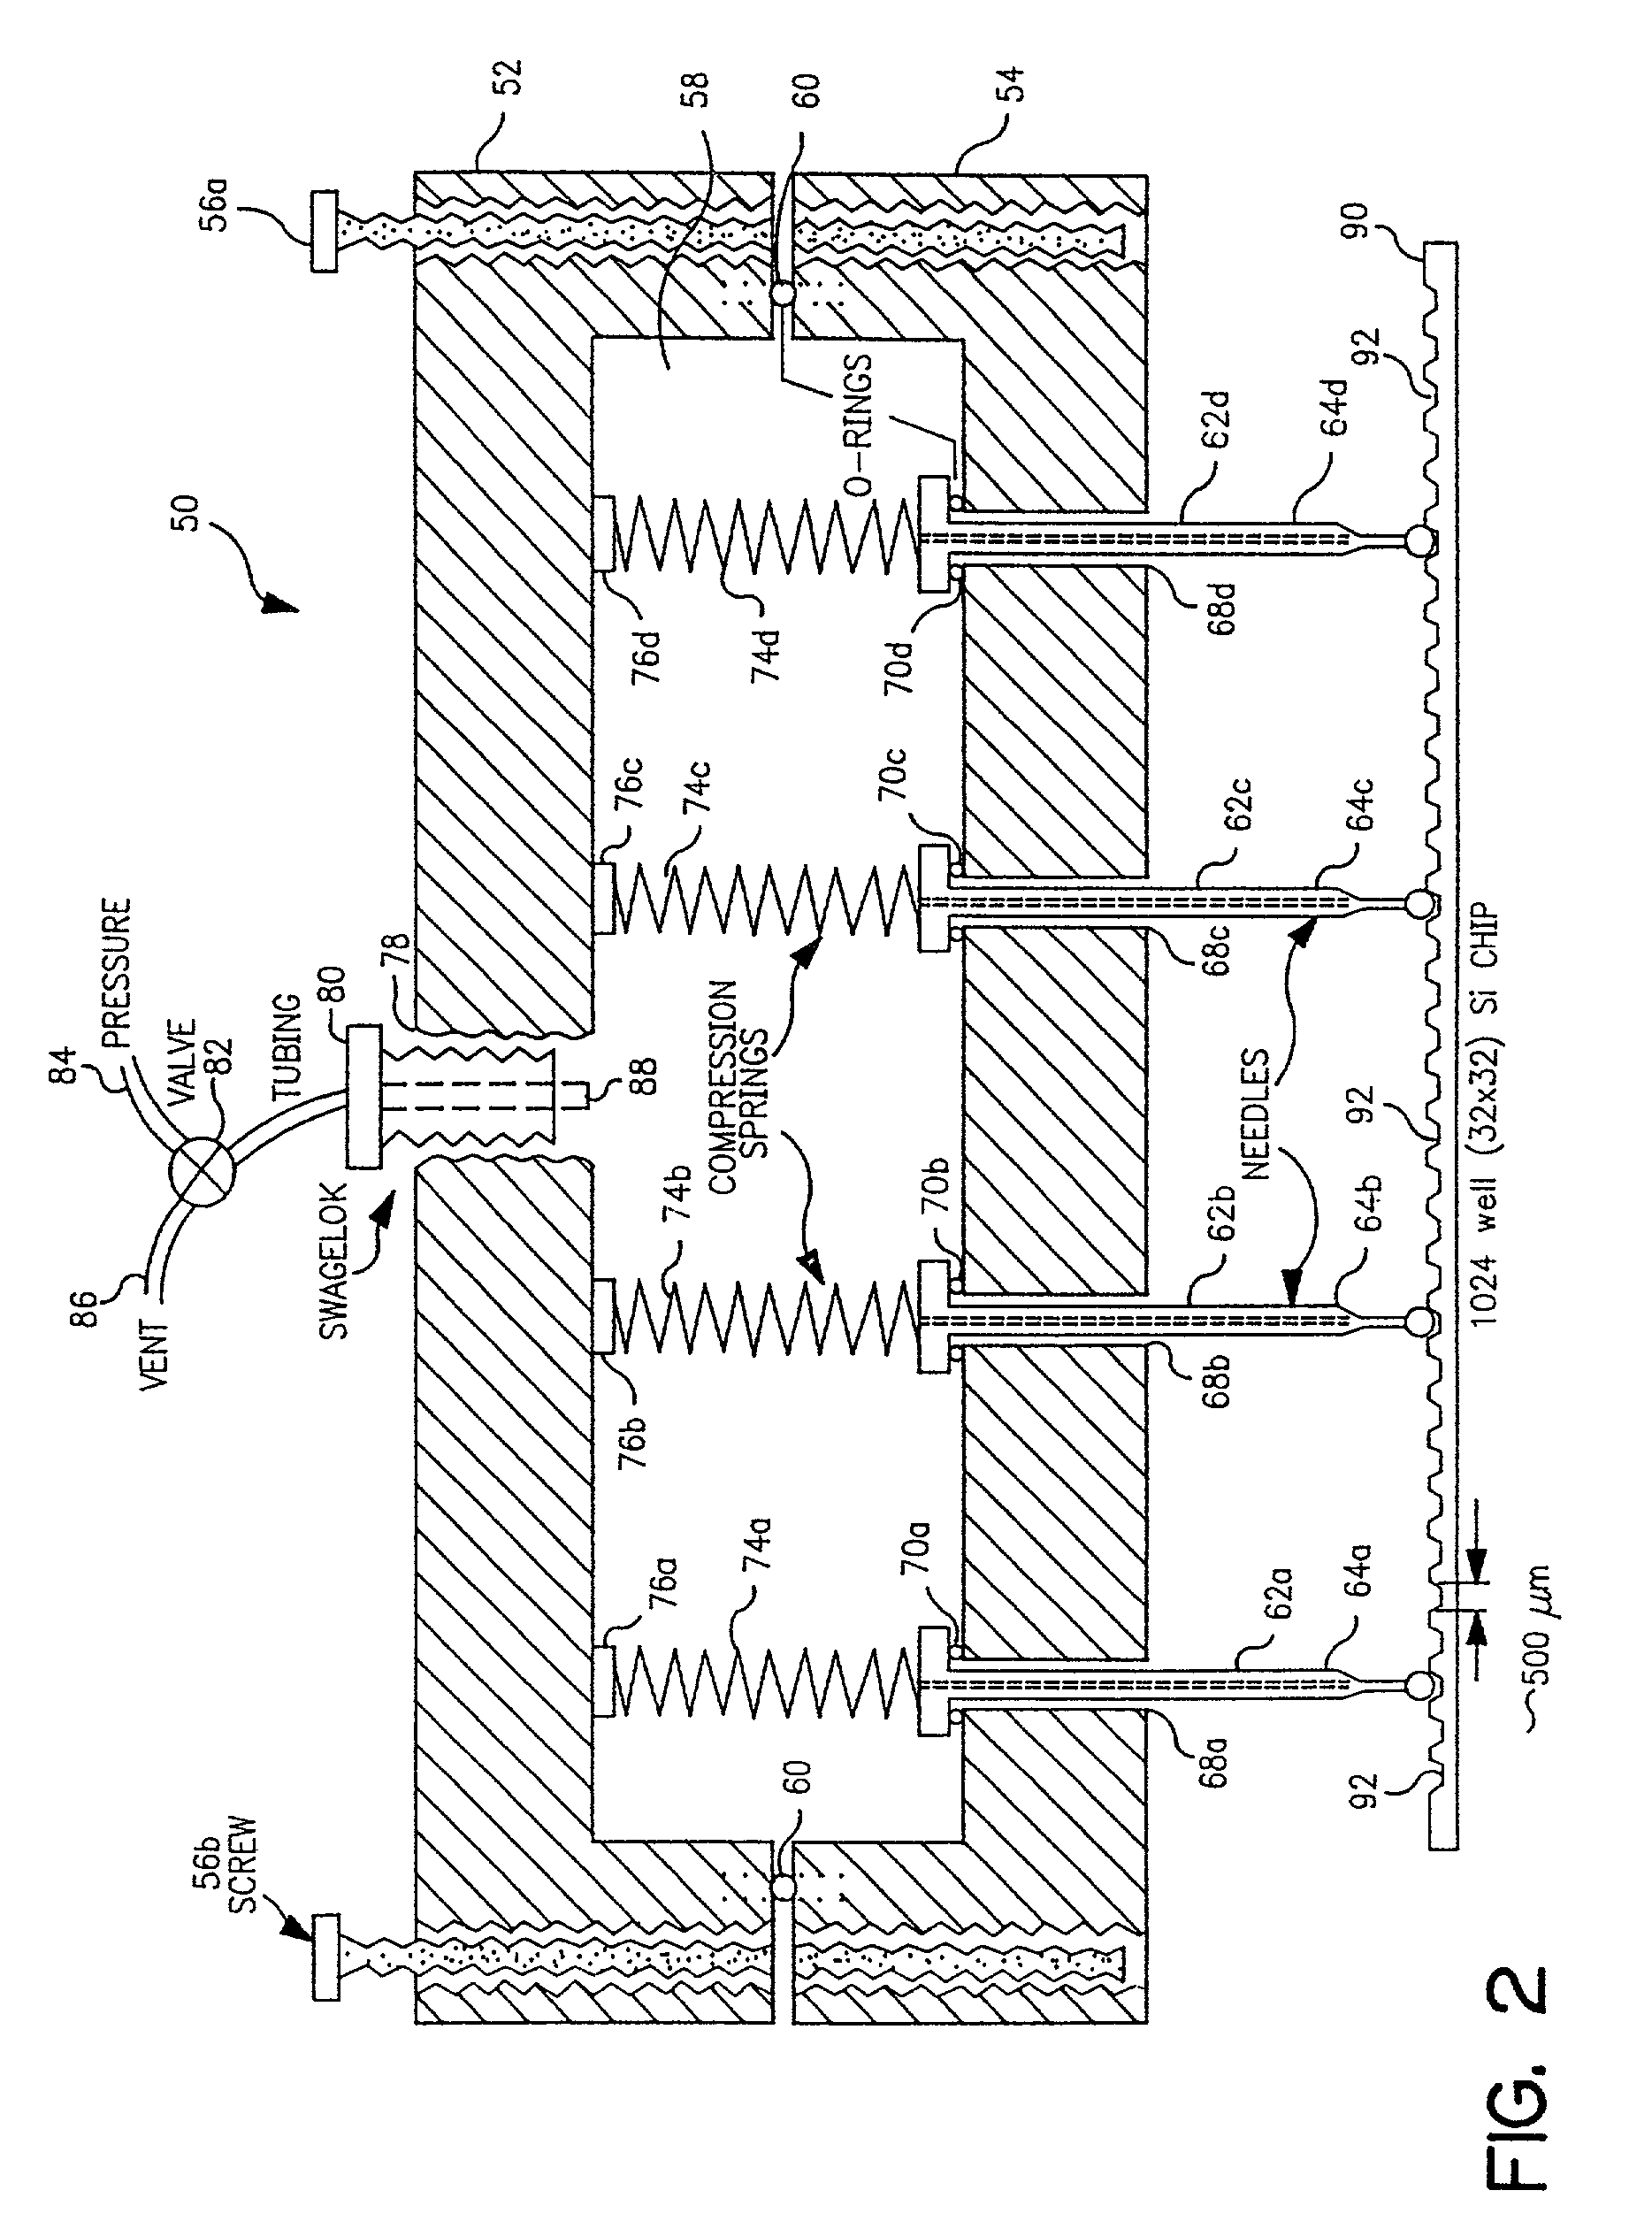 Systems and methods for preparing and analyzing low volume analyte array elements